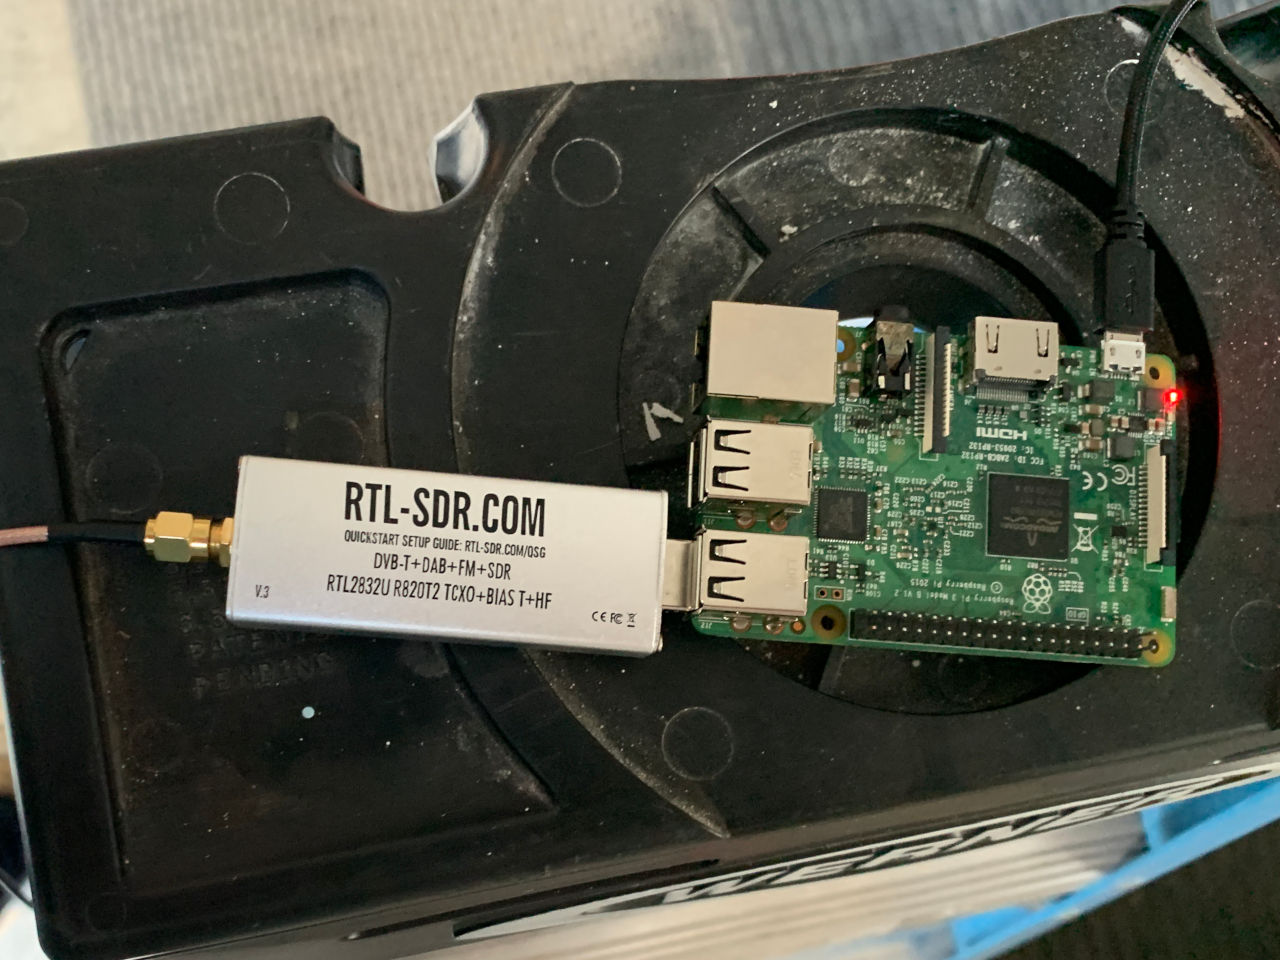 Photograph of a Raspberry Pi single board computer with an RTL-SDR software-defined radio attached.